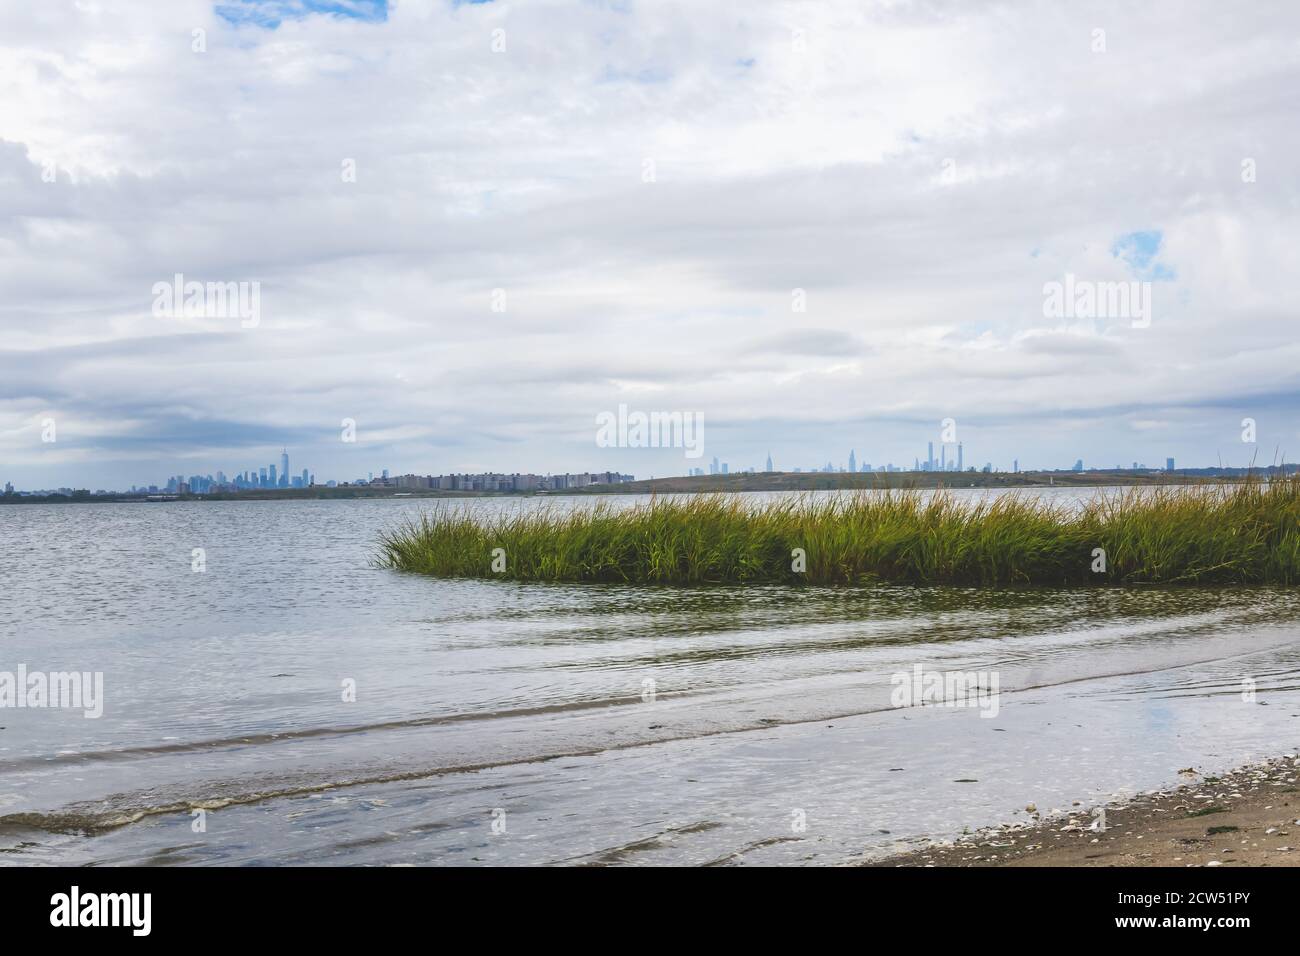 bay with sand and grass at Jamaica bay wildlife refuge with nyc background Stock Photo